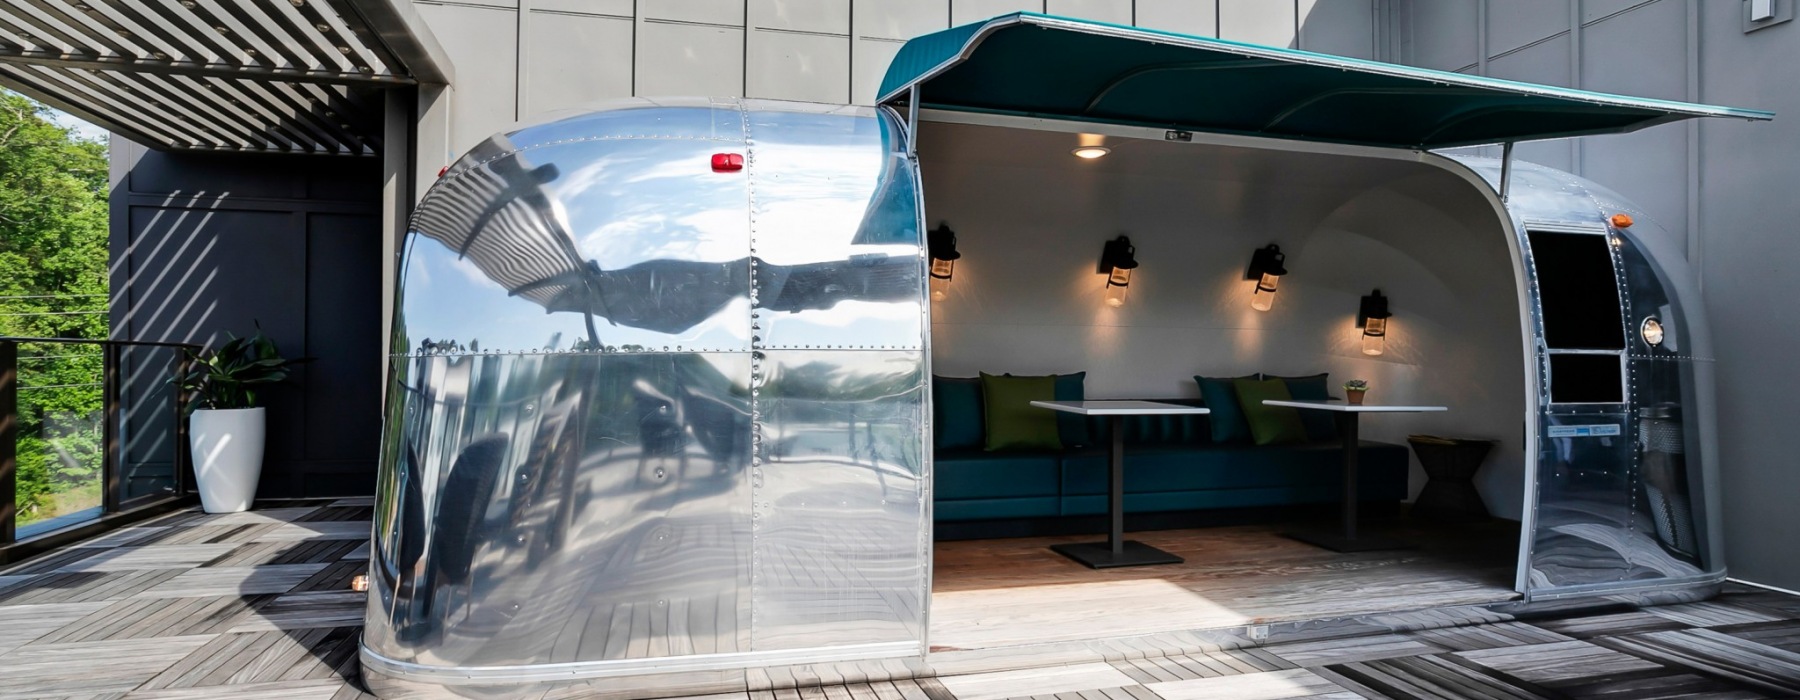 Rooftop Airstream